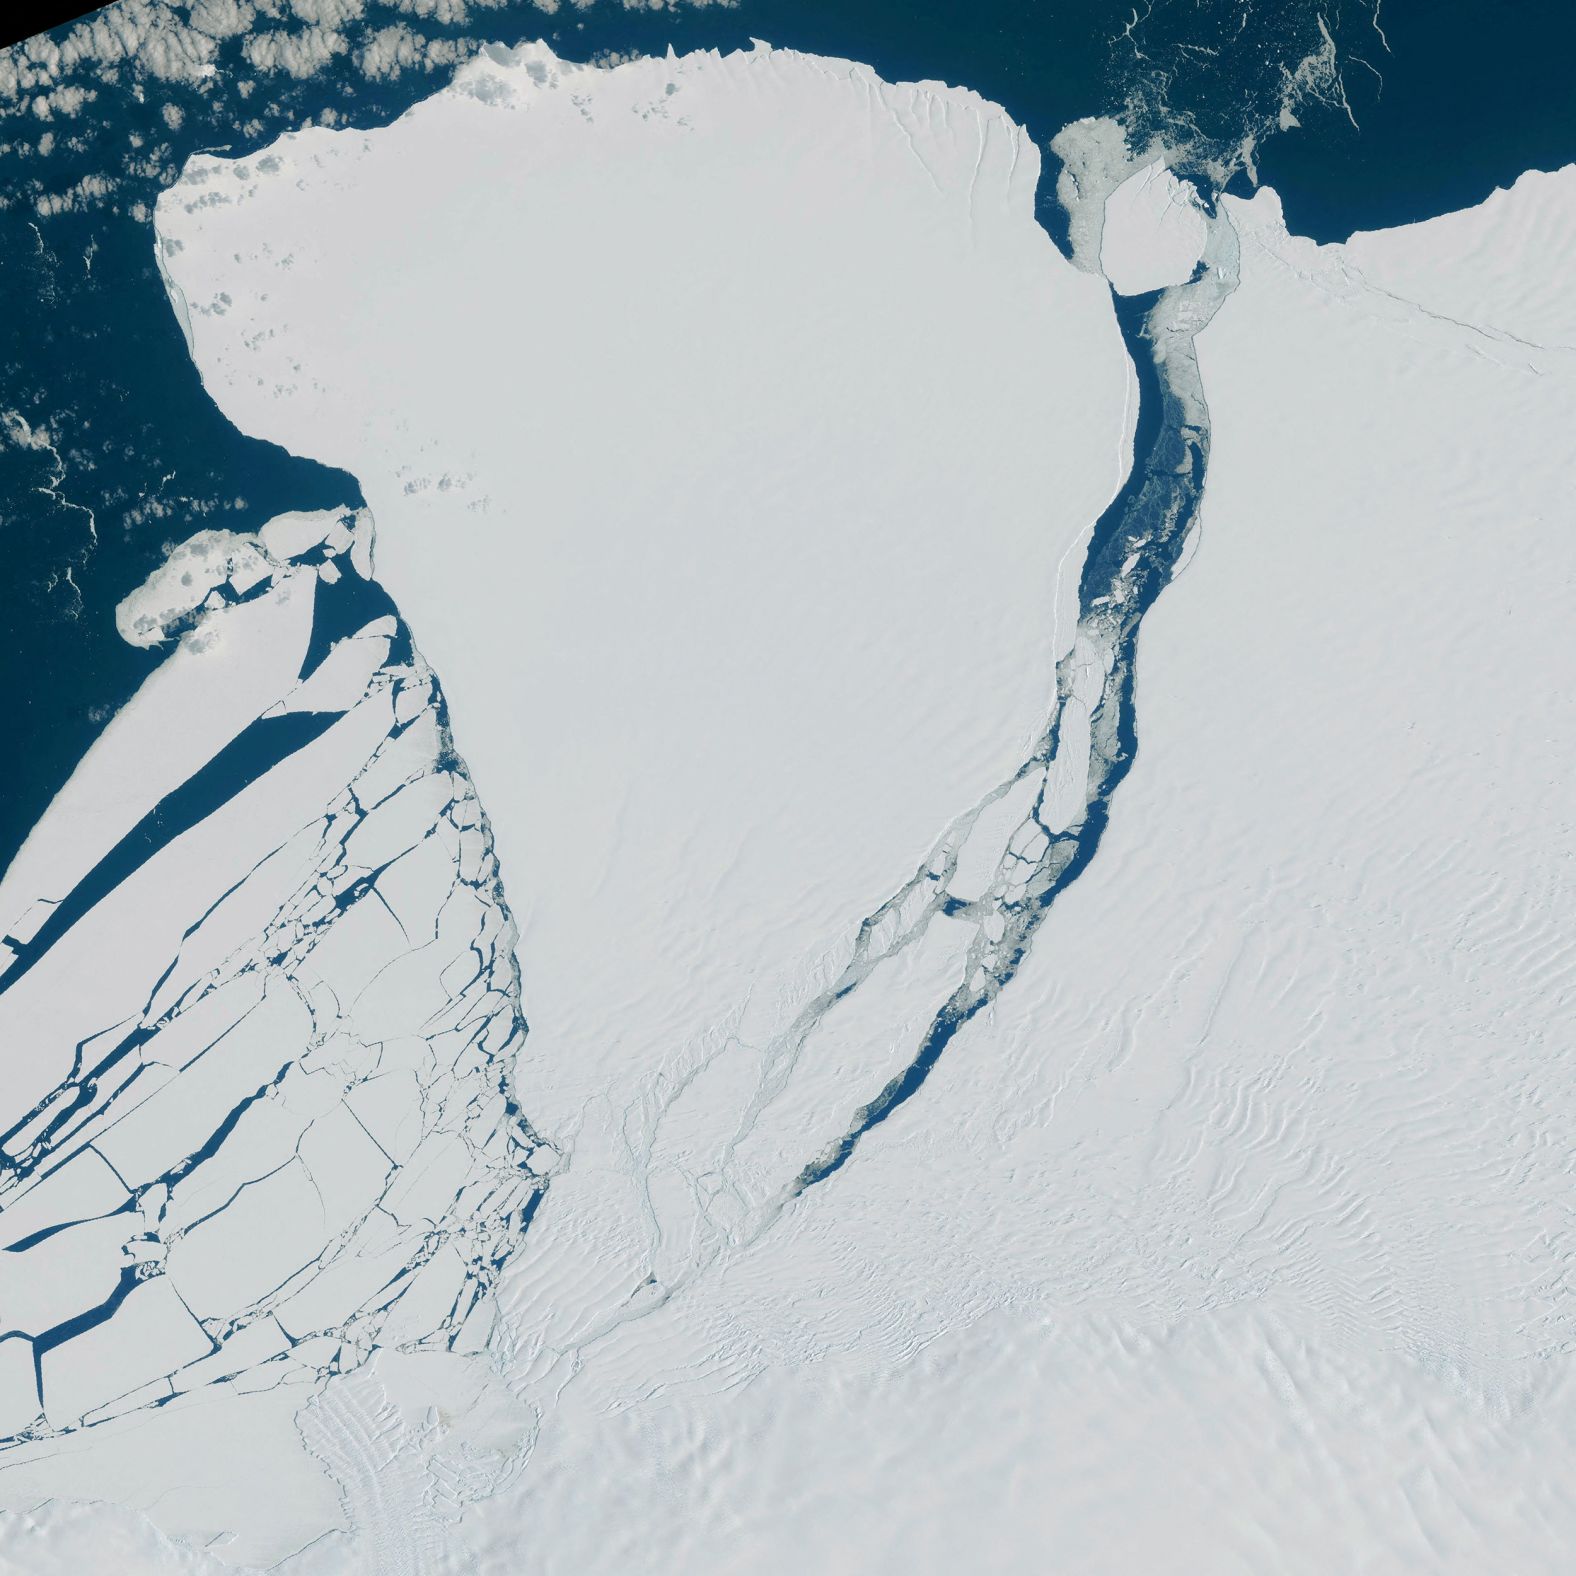 This aerial photo shows an iceberg, nearly the size of Greater London, <a href="index.php?page=&url=https%3A%2F%2Fwww.cnn.com%2F2023%2F01%2F25%2Fworld%2Fantarctica-brunt-iceberg-climate%2Findex.html" target="_blank">breaking off the Brunt Ice Shelf in Antarctica</a> on Sunday, January 22. Researchers said this event was expected and not a result of climate change.